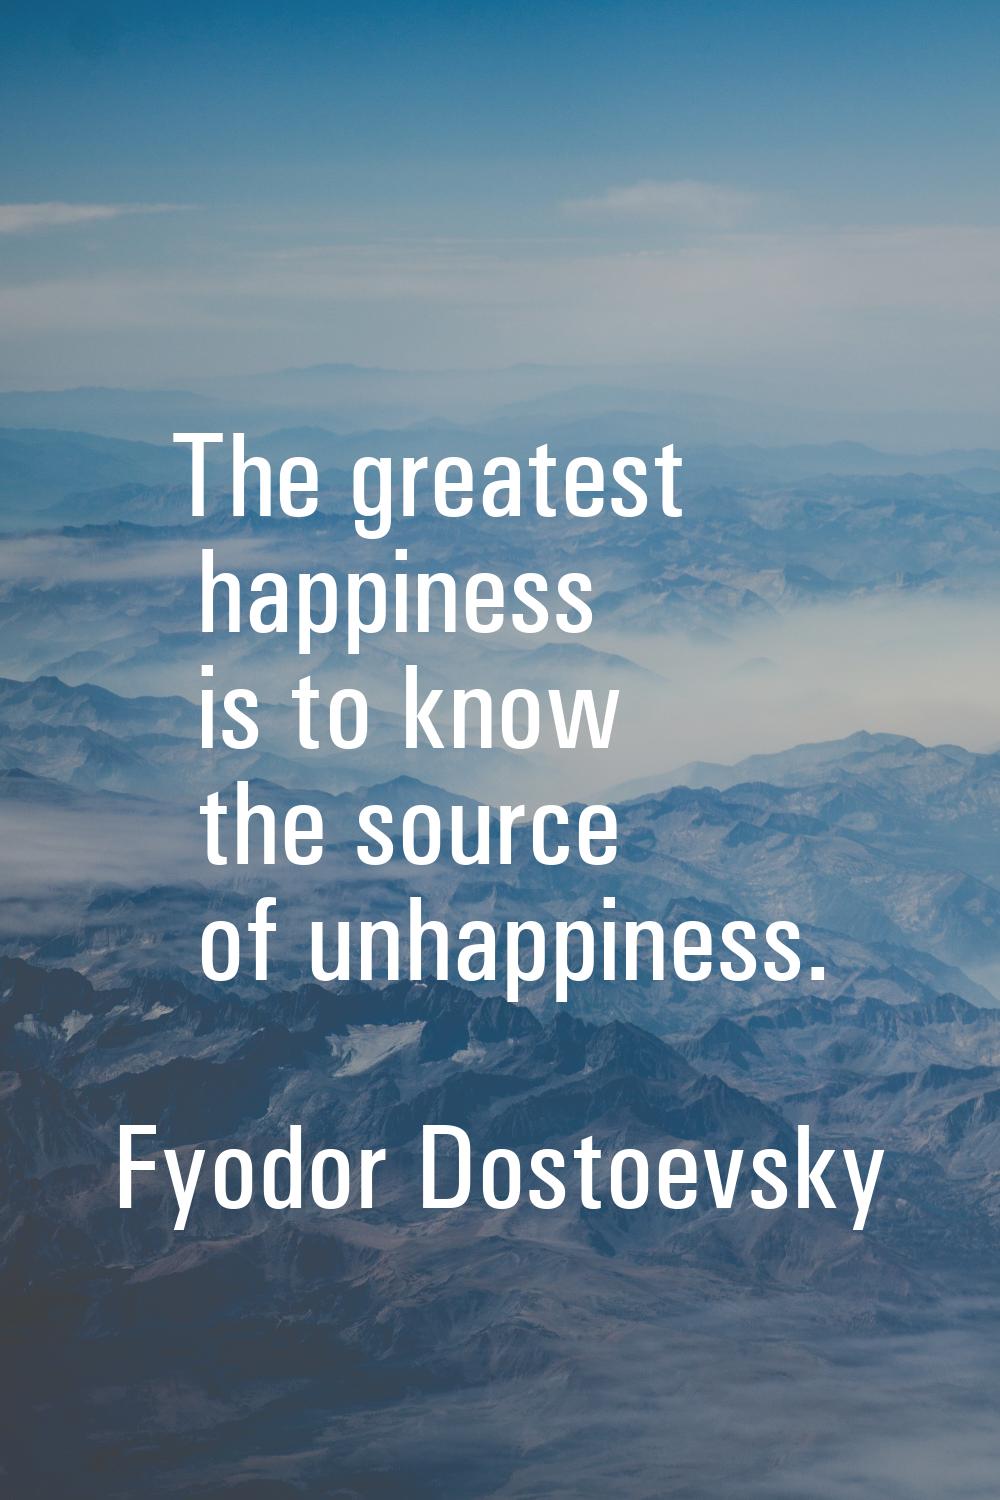 The greatest happiness is to know the source of unhappiness.